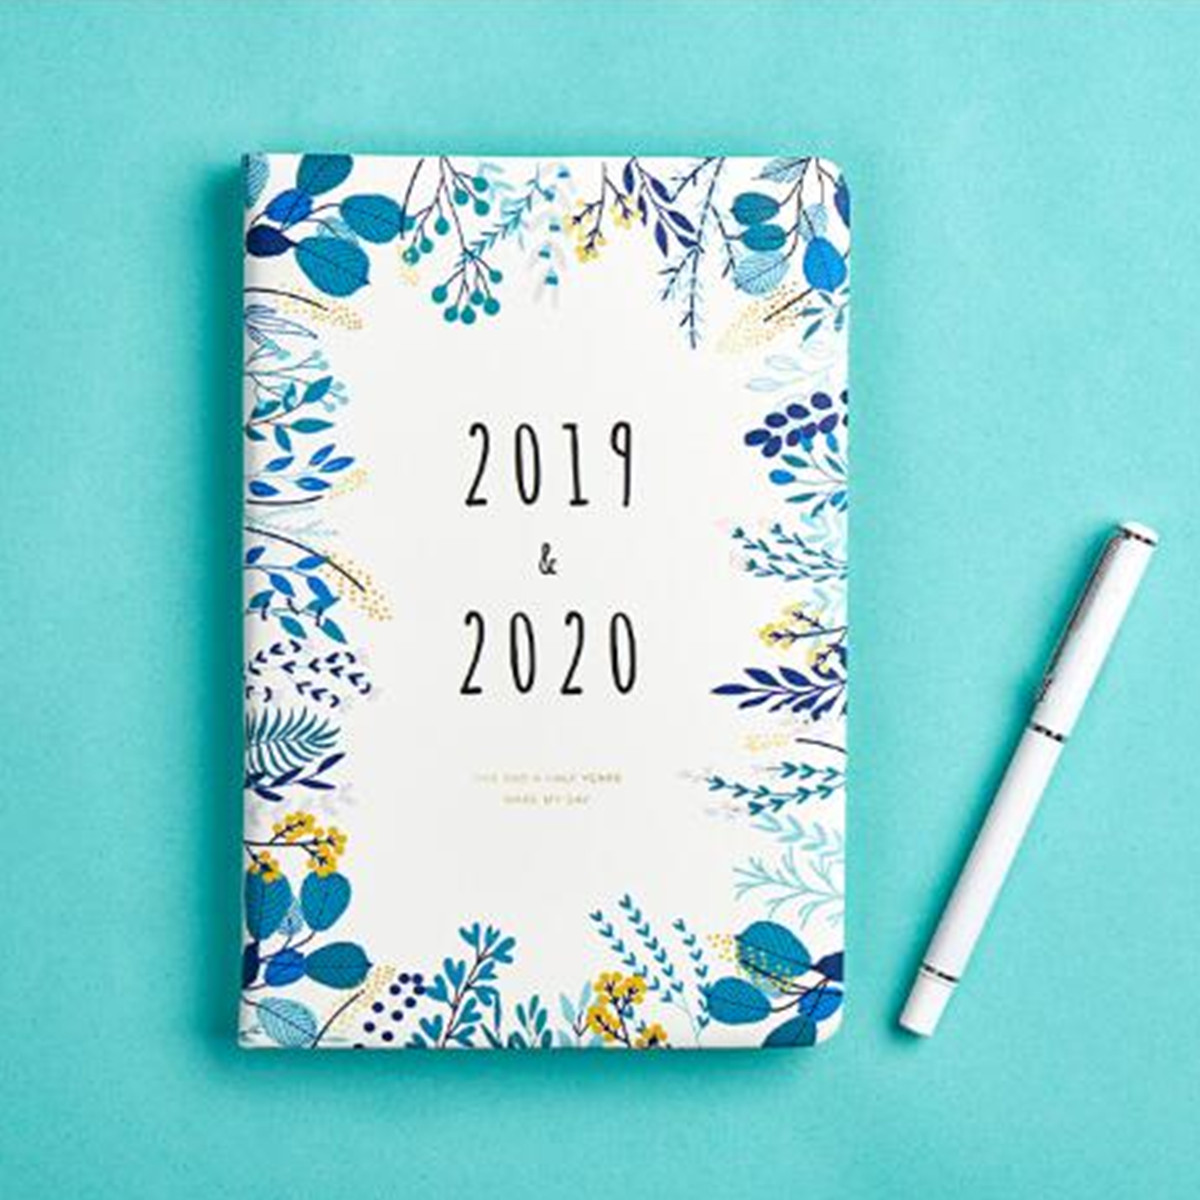 2019-2020-Weekly-Monthly-Agenda-Planner-Monthly-Weekly-Plan-Portable-Notebook-Cute-Diary-Flower-Sche-1530952-1